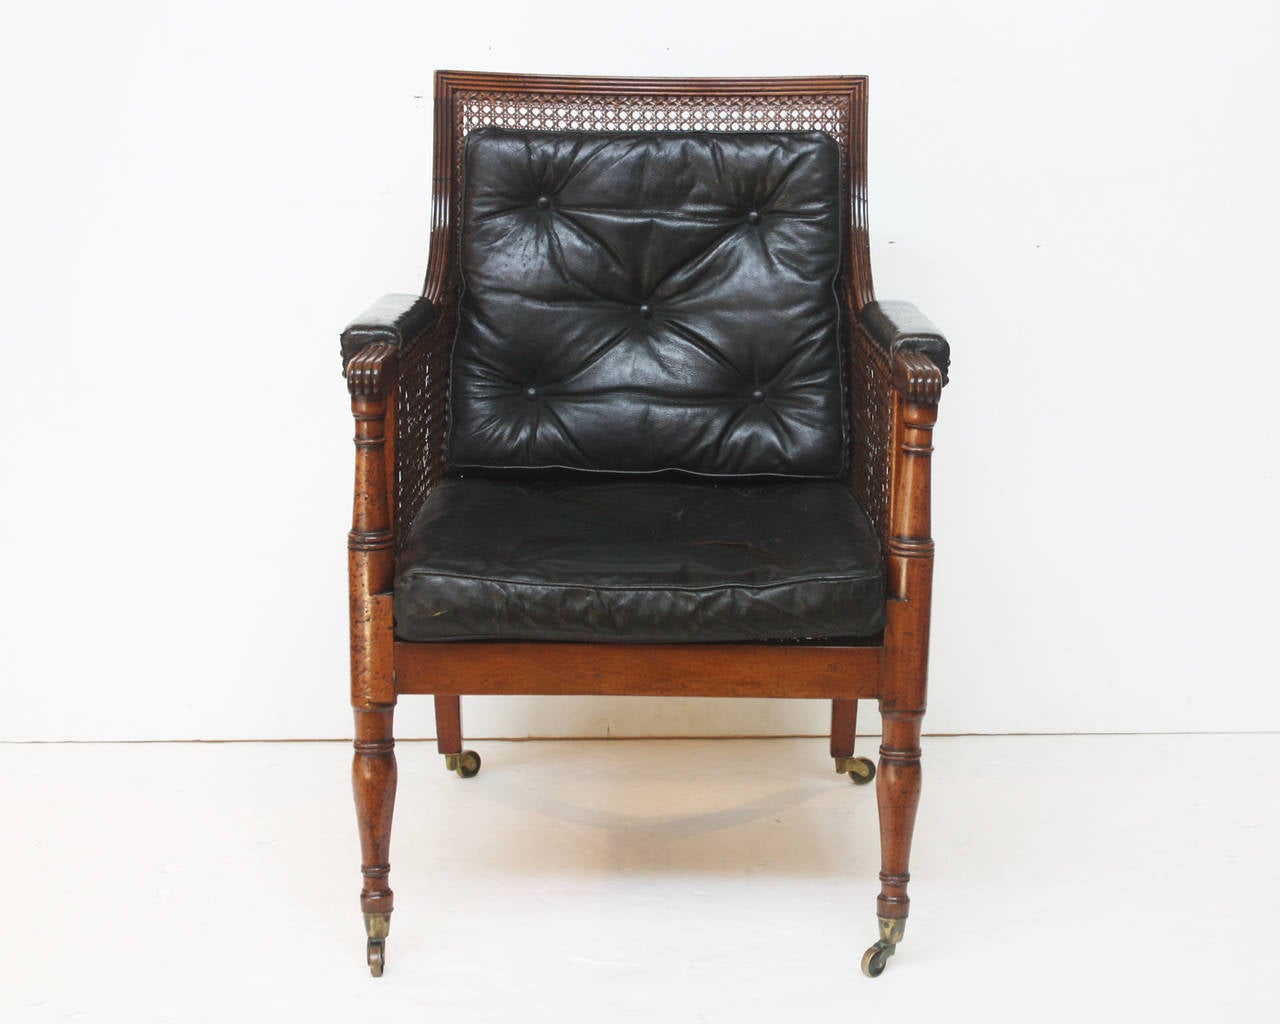 Period Regency library chair with caned back, sides and seat, turned front legs, castors, with leather cushions